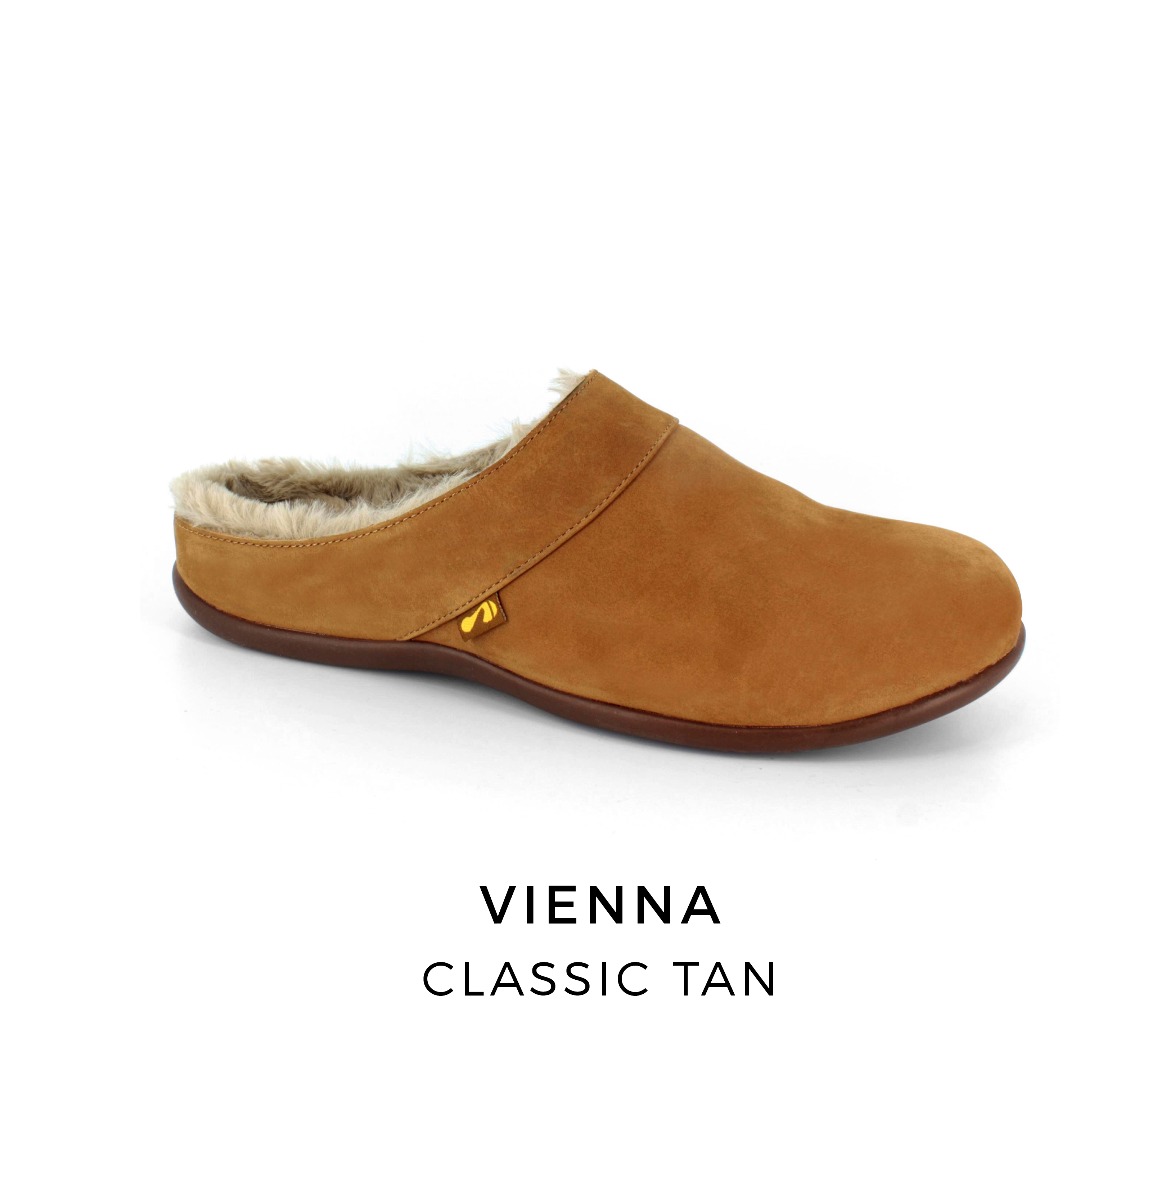 Vienna orthotic slippers with arch support